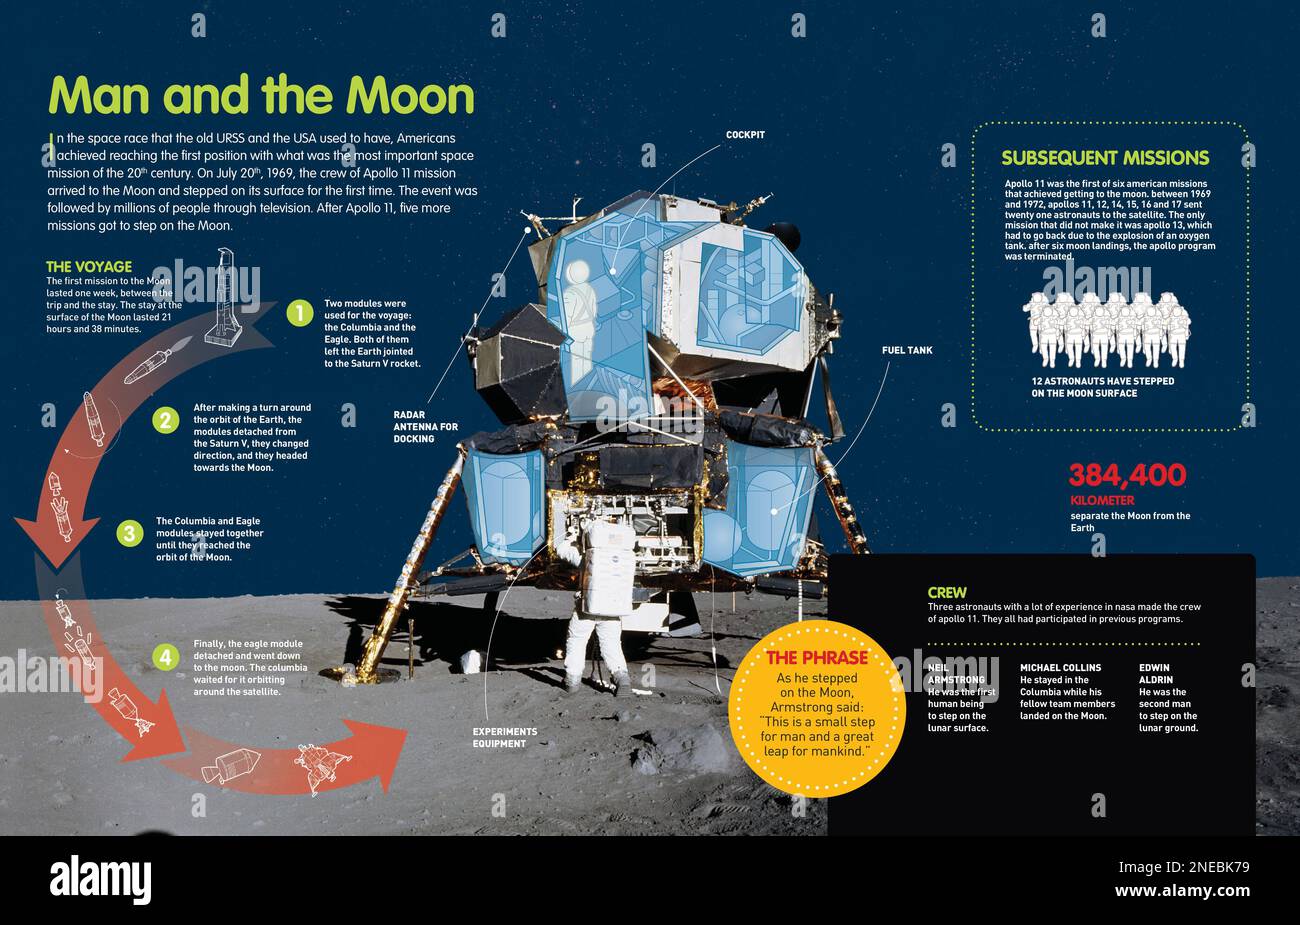 Infographic about the space mission of Apollo 11 that allowed man to sep on the surface of the Moon for the first time in 1969. [QuarkXPress (.qxp); Adobe InDesign (.indd); 4960x3188]. Stock Photo